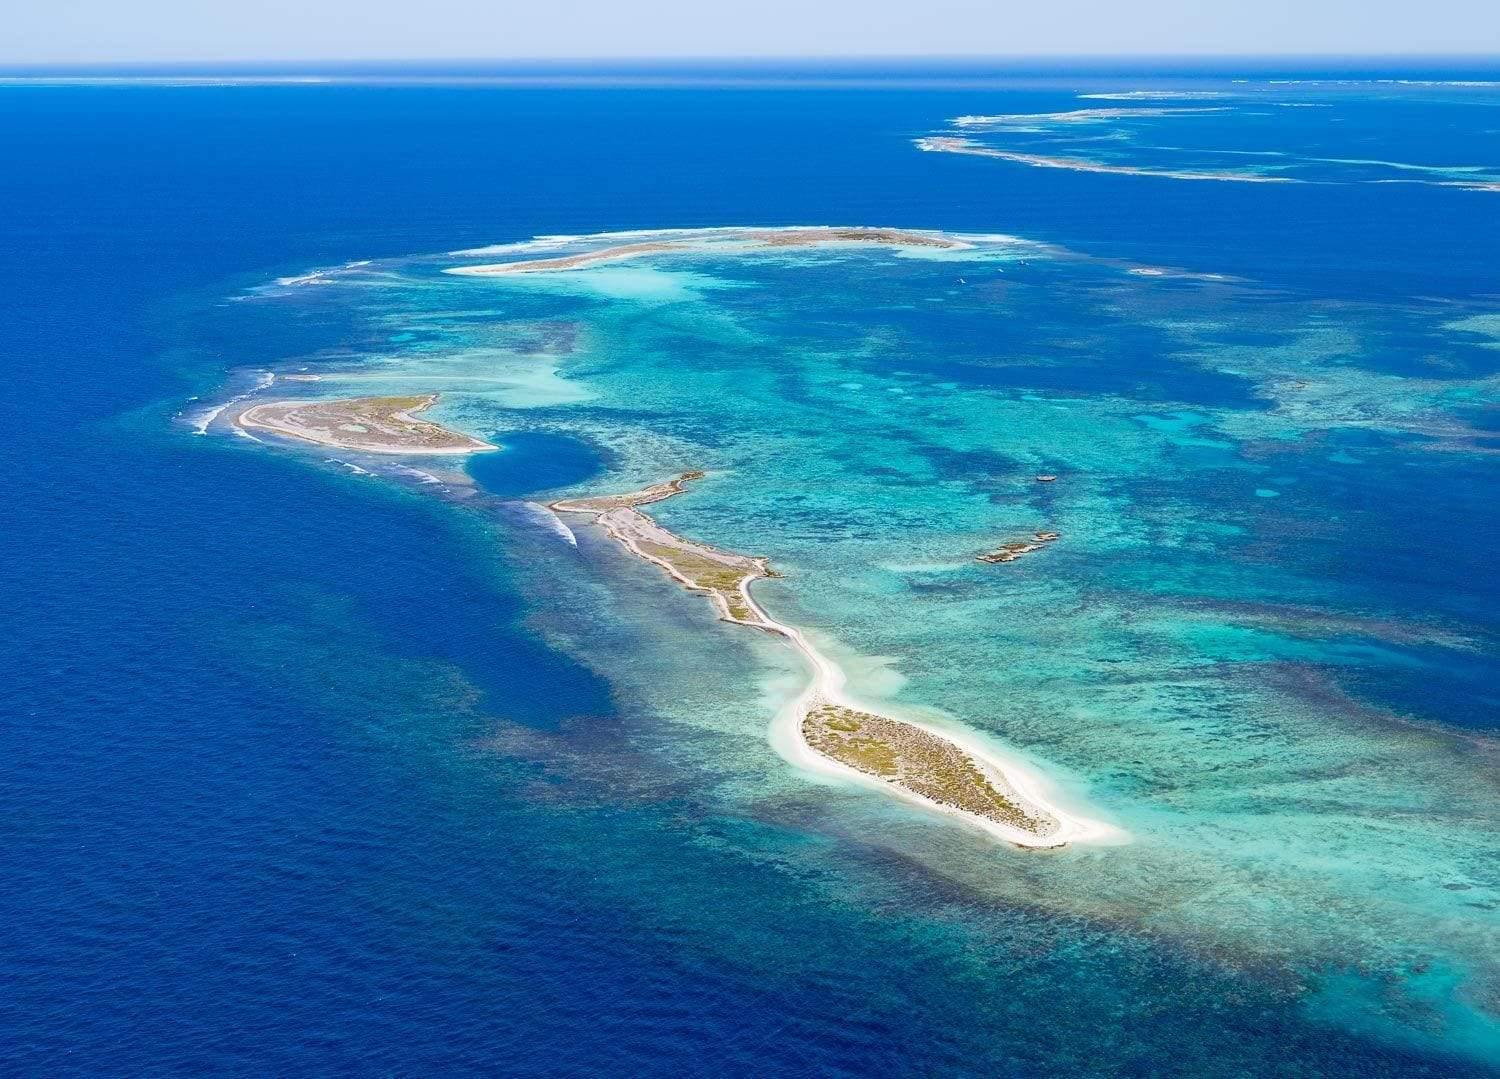 A large green area over a dark blue ocean, Island Paradise Houtman Abrolhos